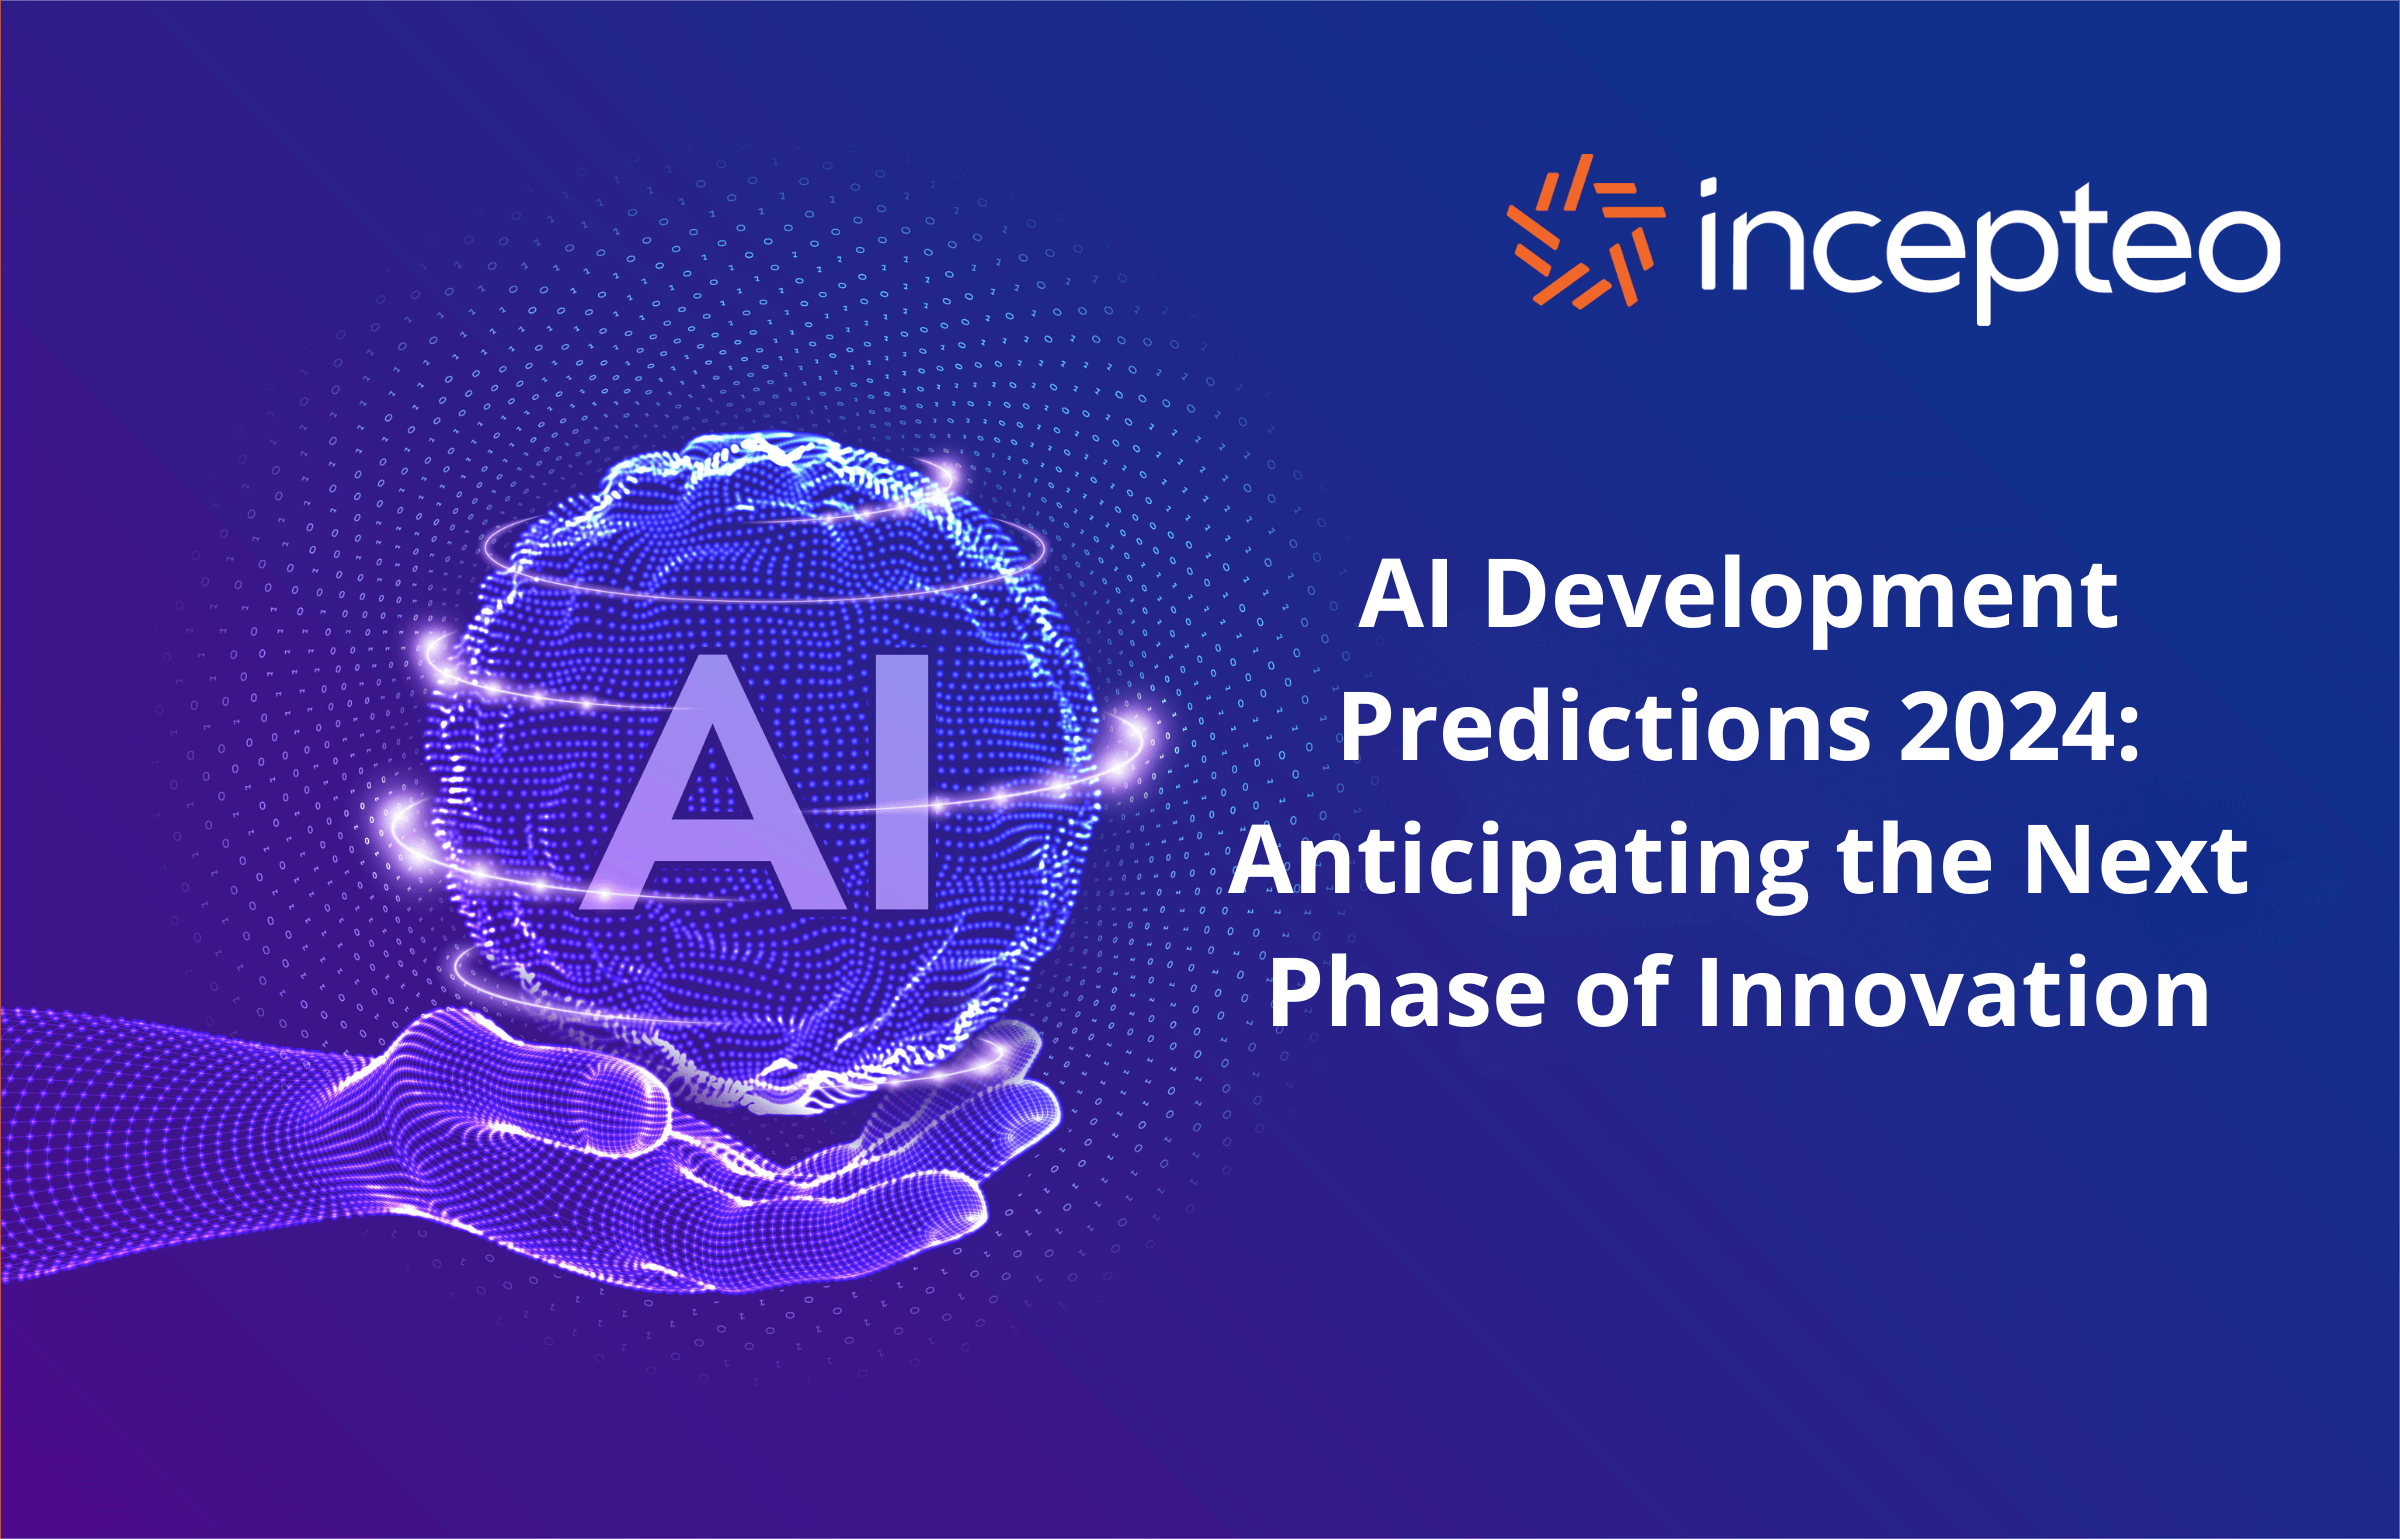 AI Development Predictions 2024: Anticipating the Next Phase of Innovation